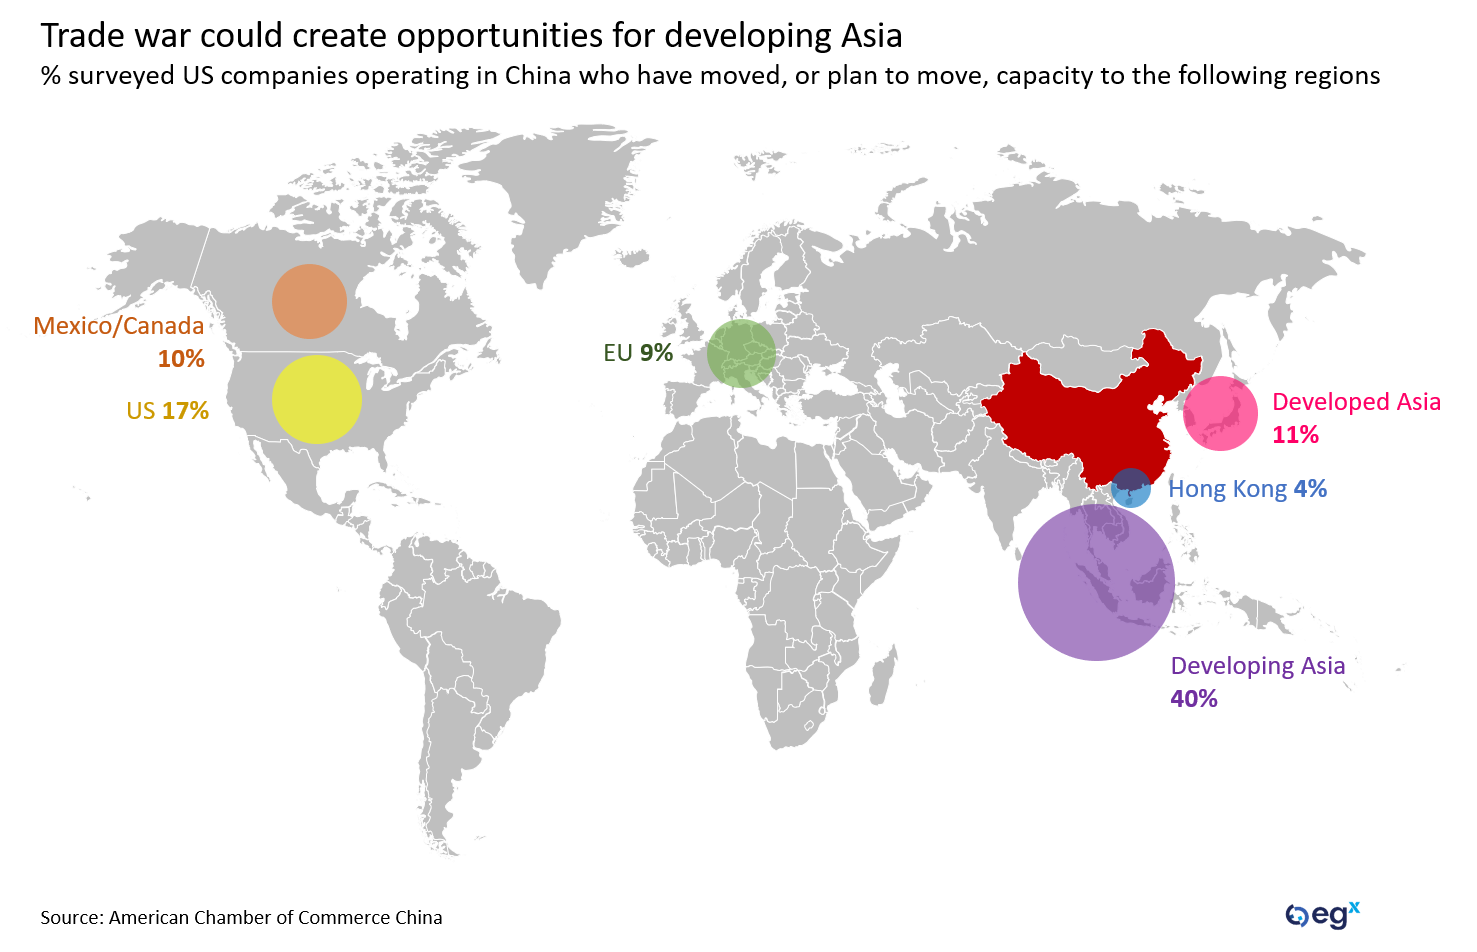 Trade war opportunities for developing Asia